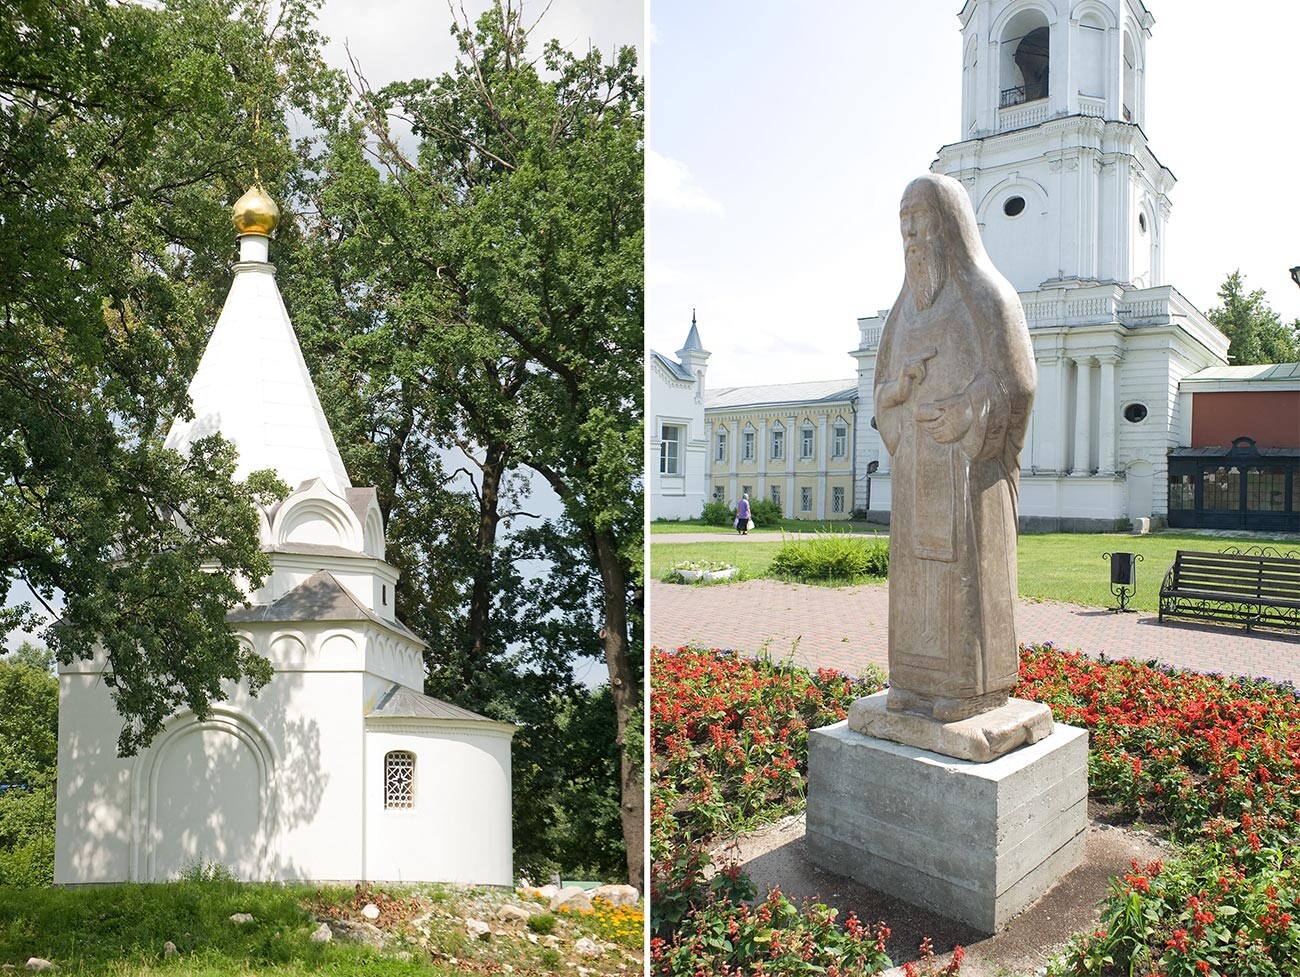 Left: St. Nicholas-Ugreshky Monastery. Chapel of the Passion of Christ, south view. July 10, 2013. Rigth: Statue of St. Sergius of Radonezh, with bell tower in background. July 10, 2013